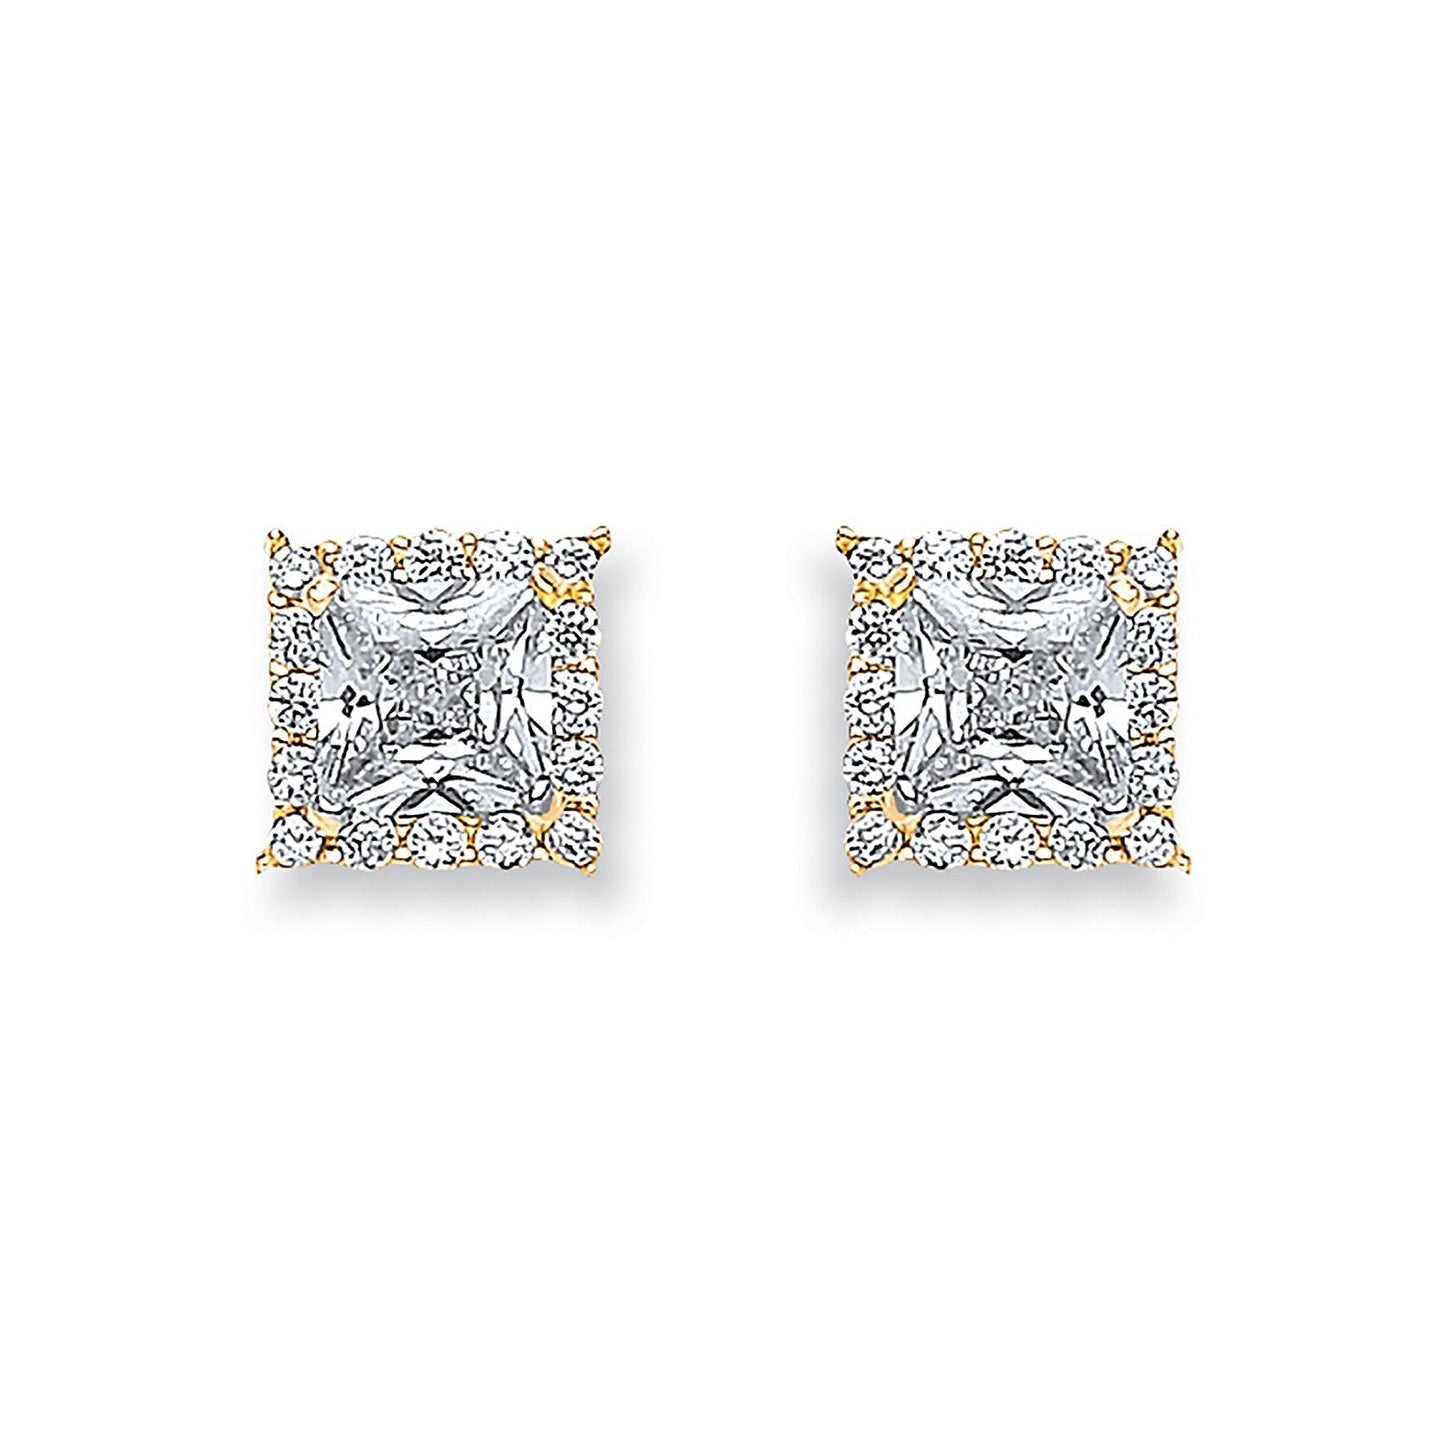 9ct Yellow Gold And Cz Stud Earrings 7.9 X 7.9mm - FJewellery